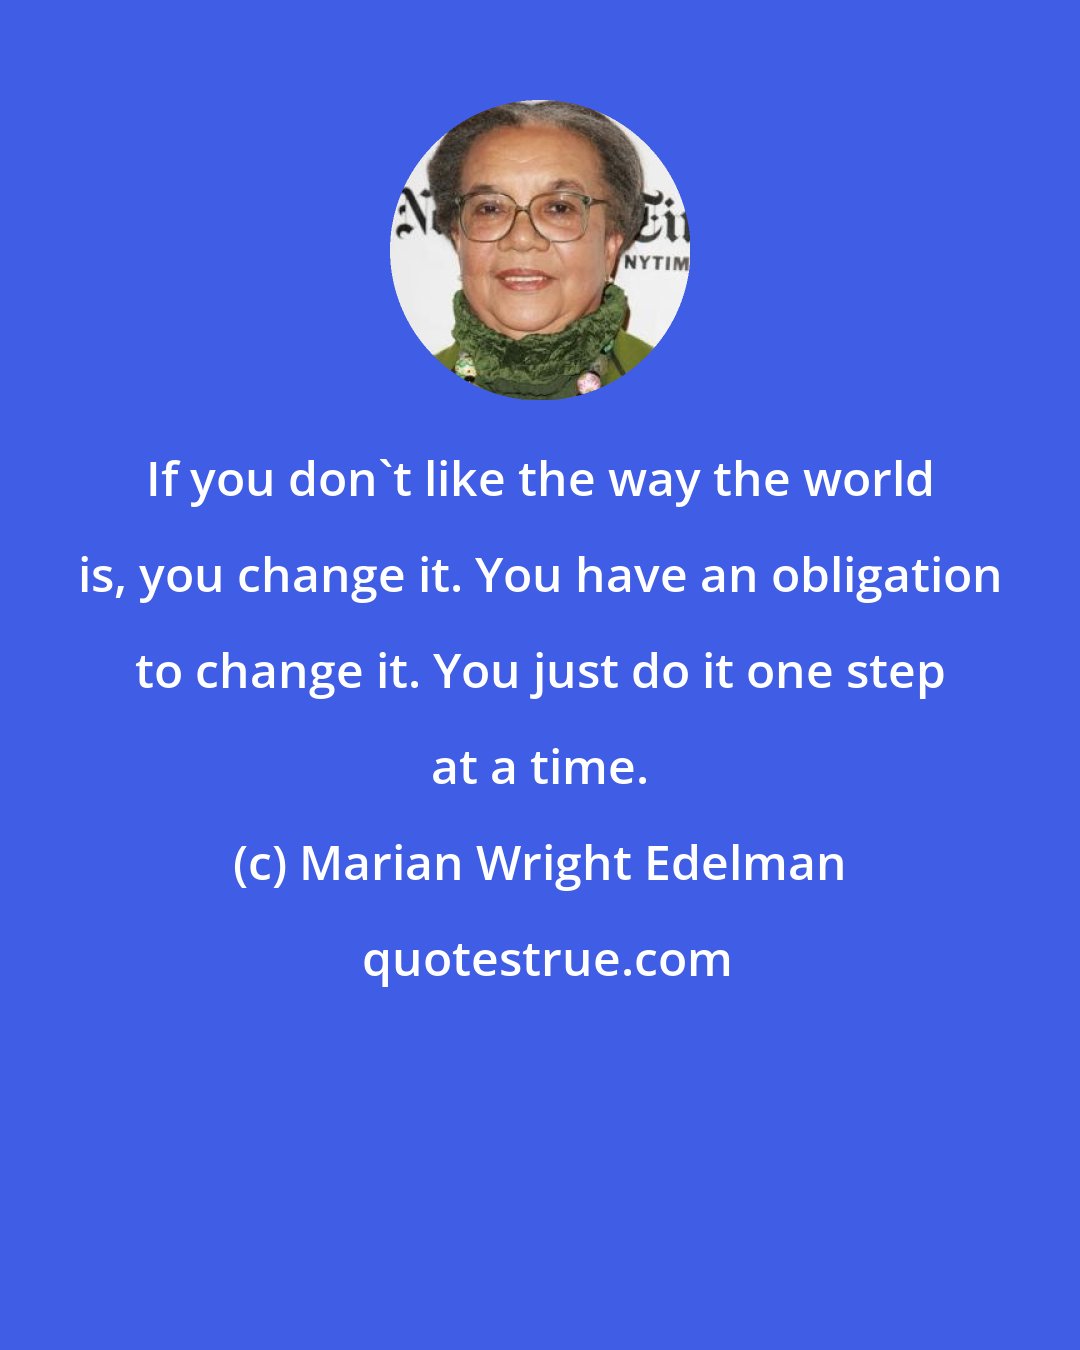 Marian Wright Edelman: If you don't like the way the world is, you change it. You have an obligation to change it. You just do it one step at a time.